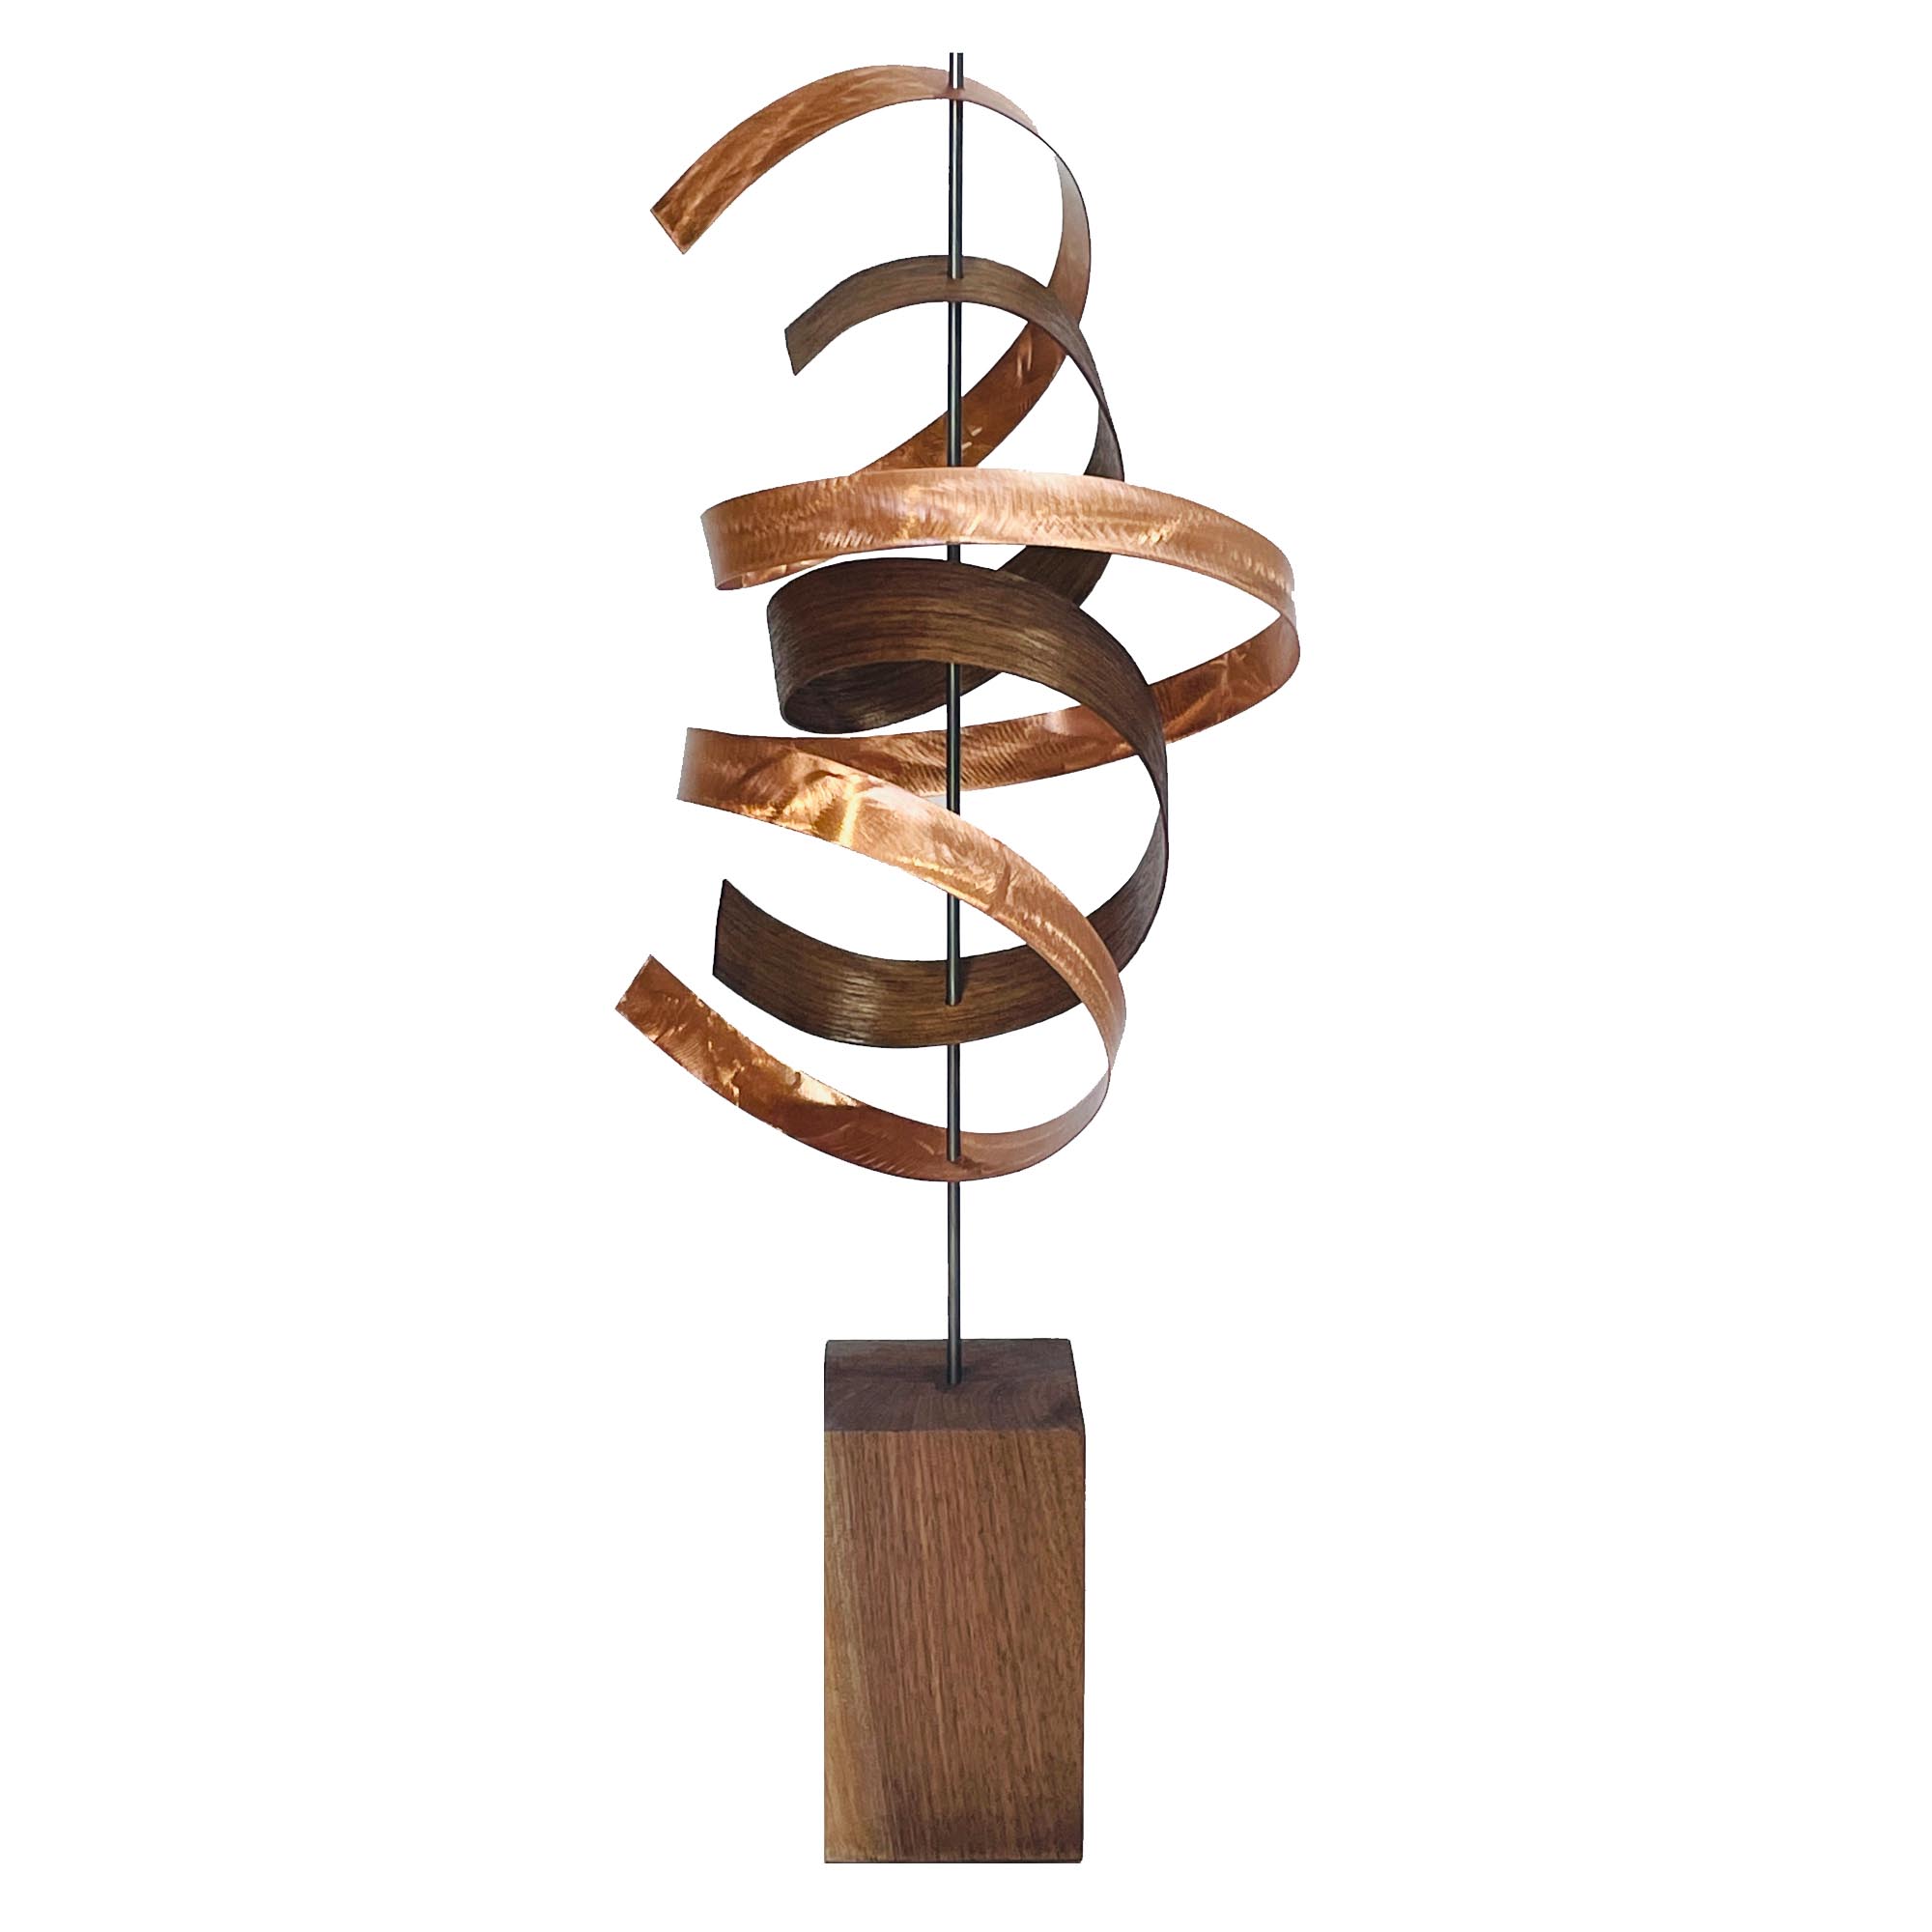 Jackson Wright 'Waltz v2 Copper Walnut' 9in x 26in Contemporary Style Abstract Wood Sculpture